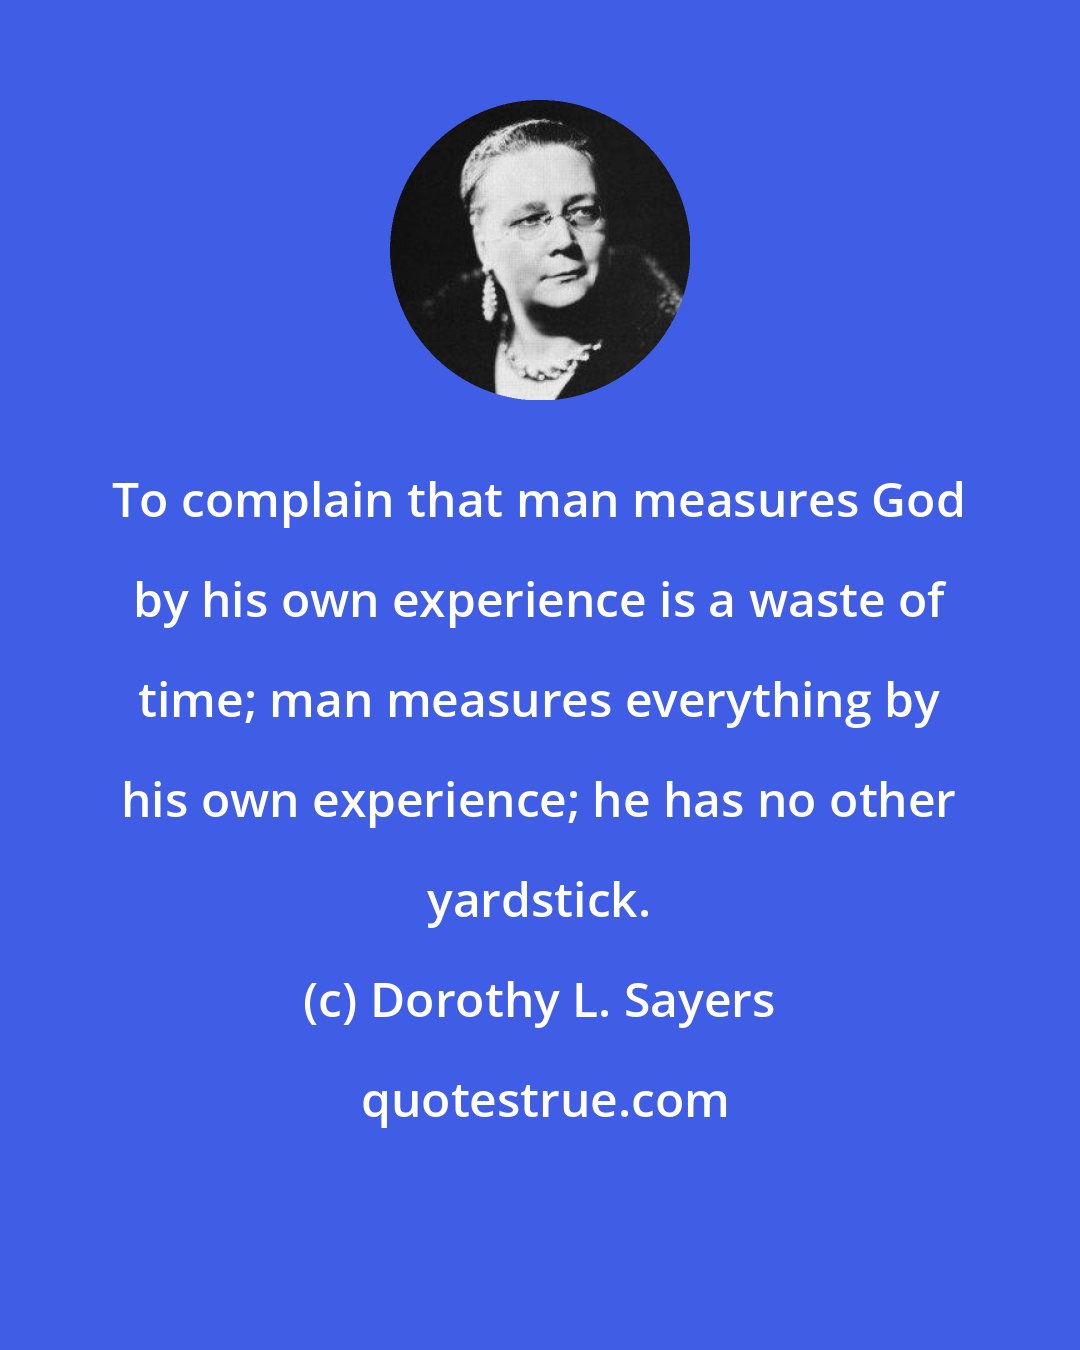 Dorothy L. Sayers: To complain that man measures God by his own experience is a waste of time; man measures everything by his own experience; he has no other yardstick.